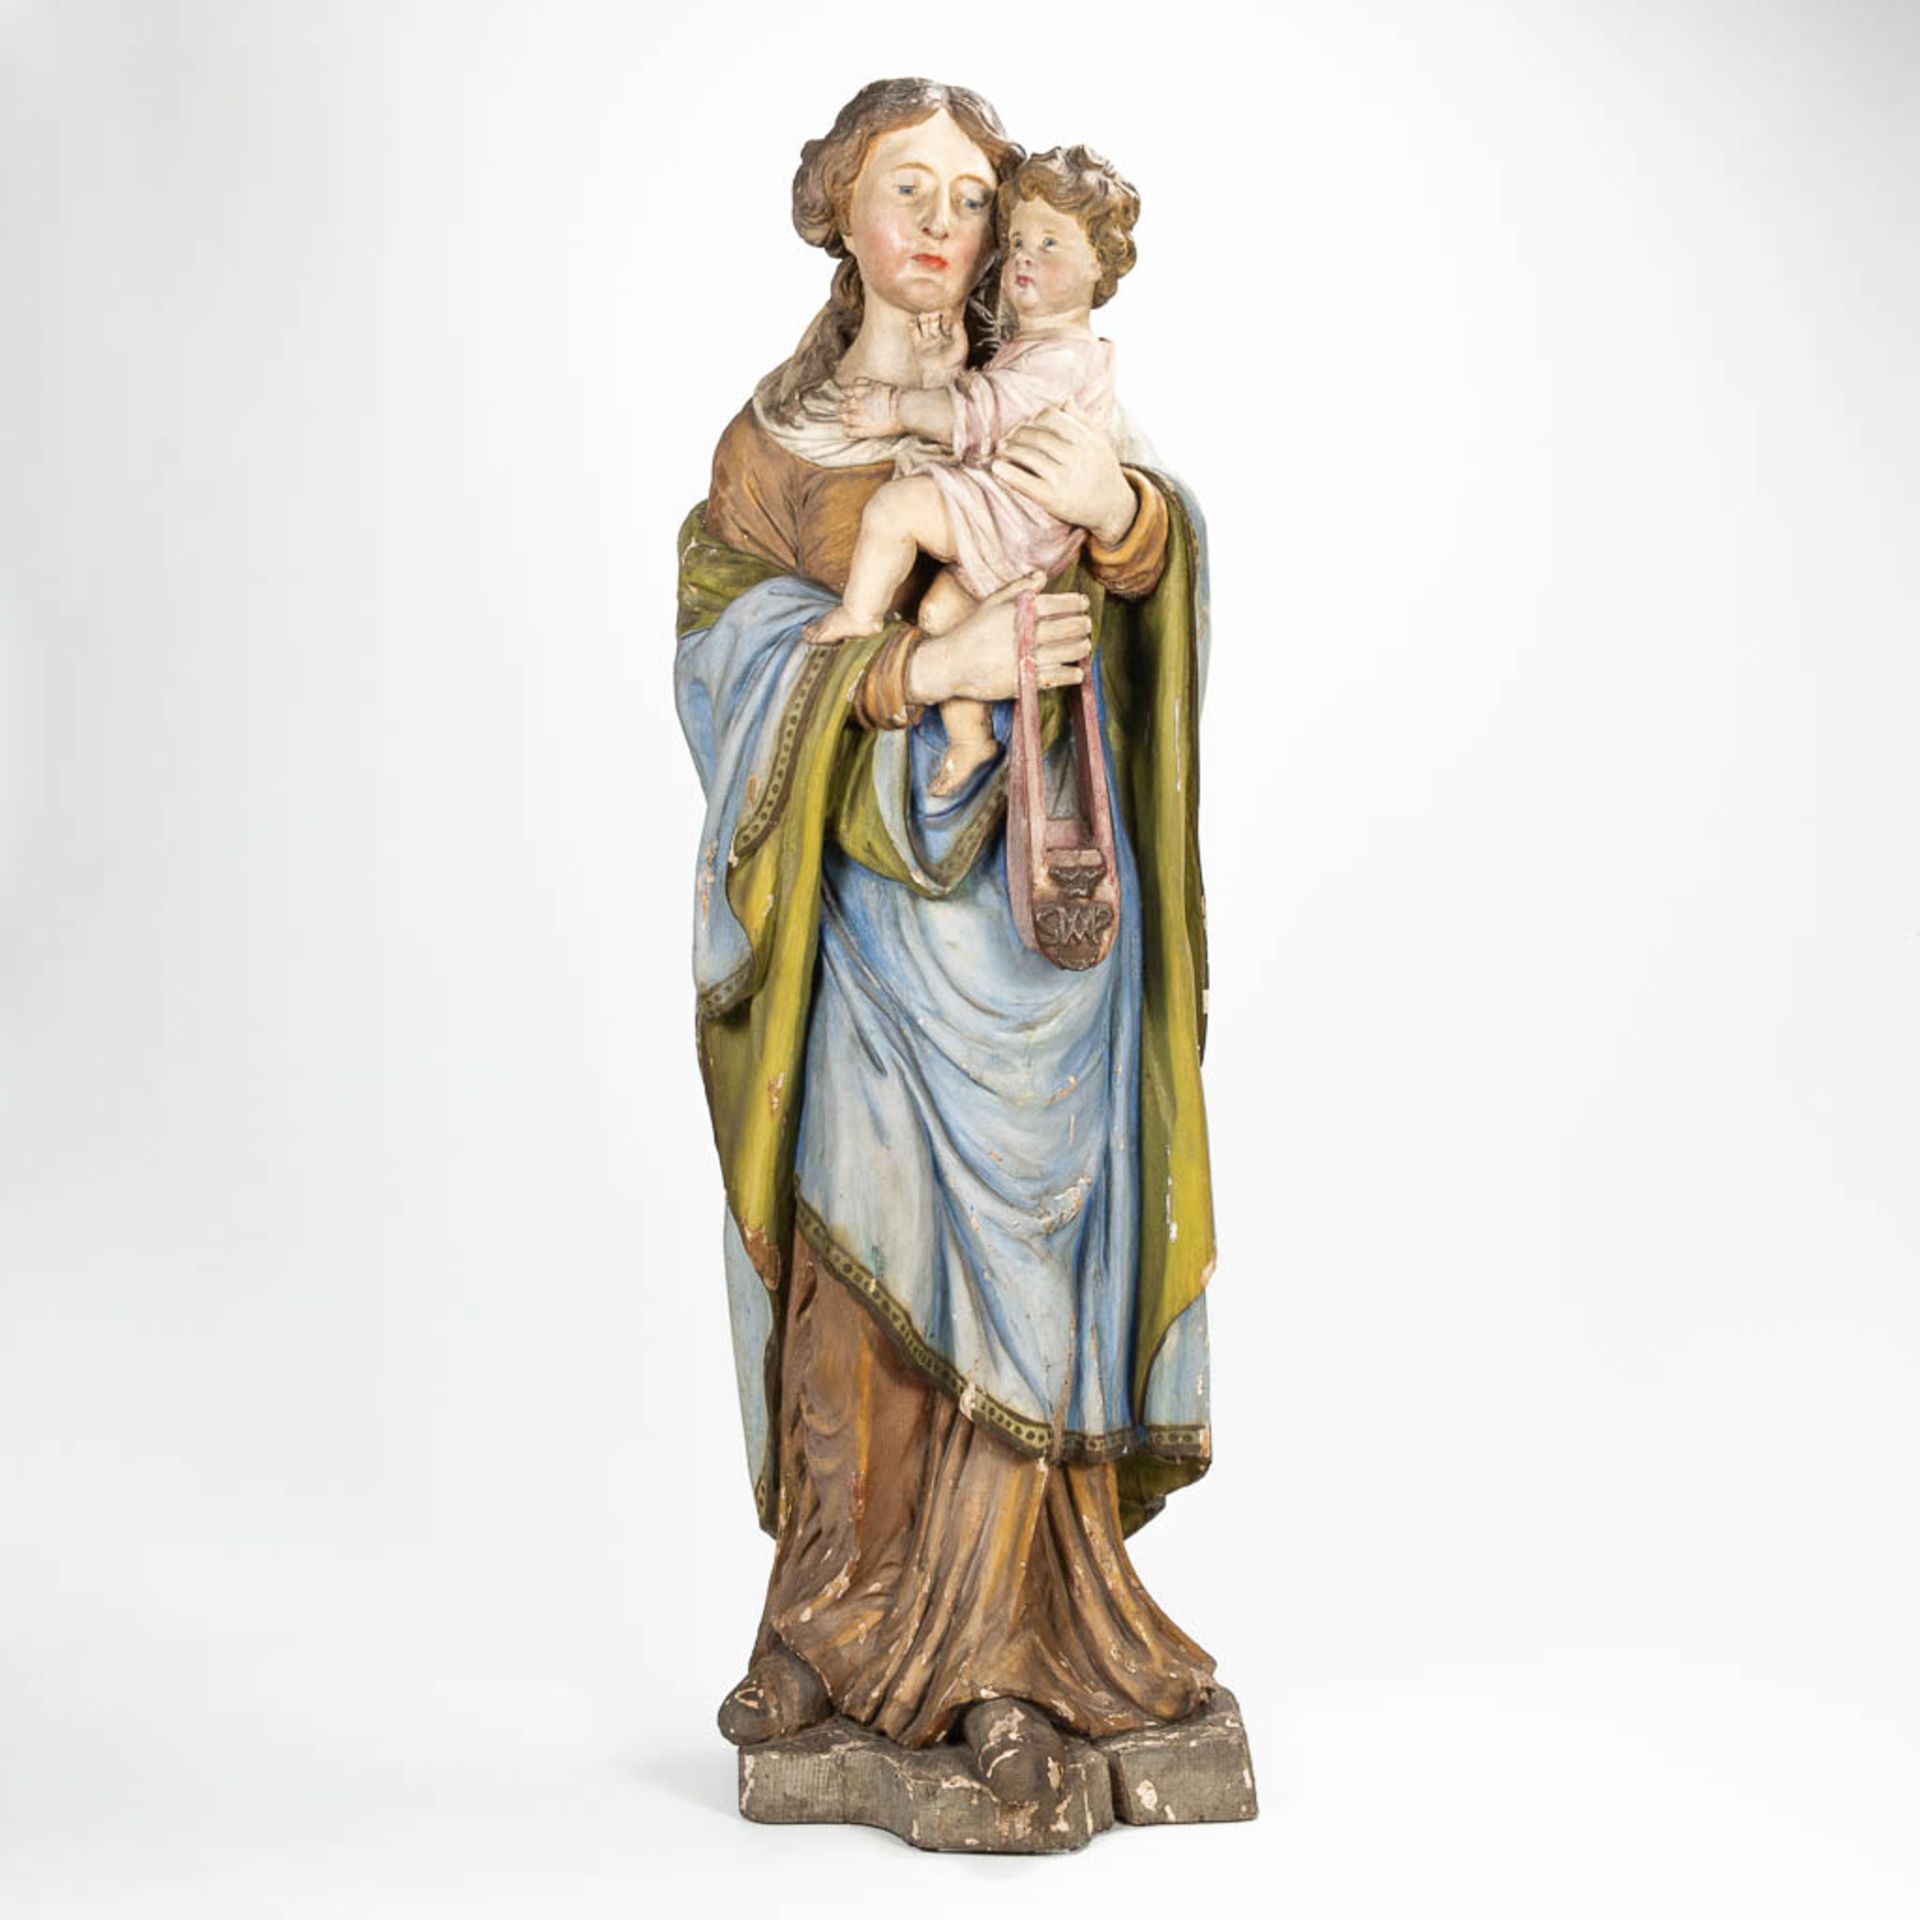 A large statue 'Madonna with child' made of sculptured oak, probably Brabant. 17th/18th century. (30